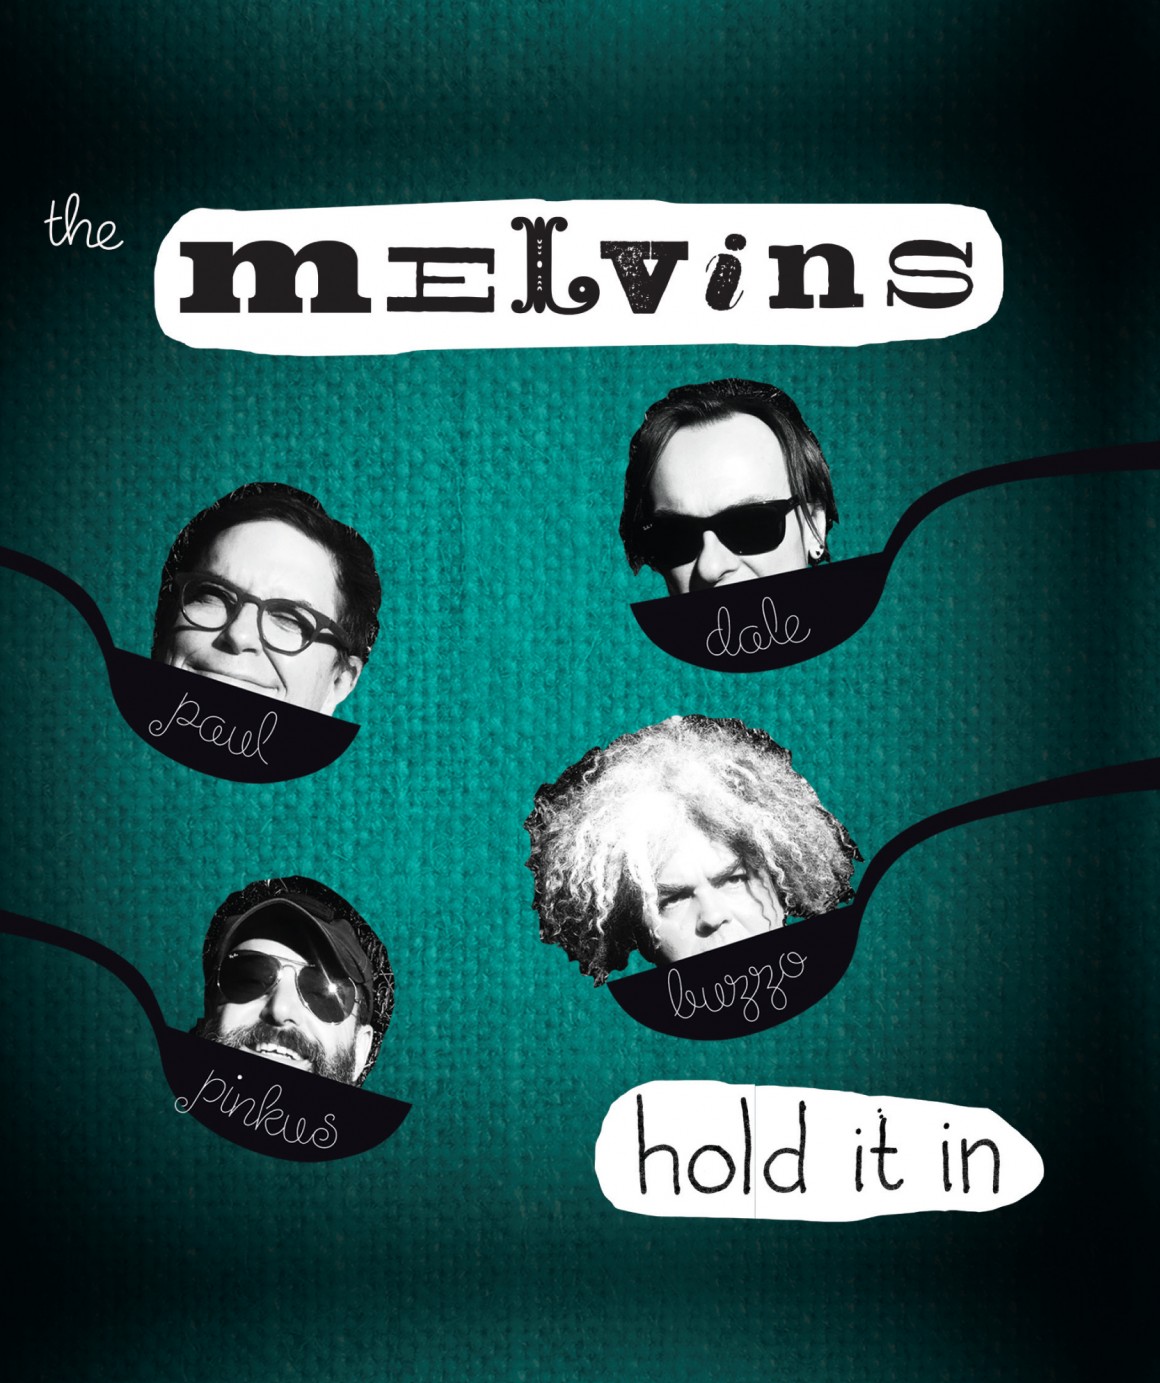 Melvins-Hold-It-In-Album-Review-1160x1383.jpg